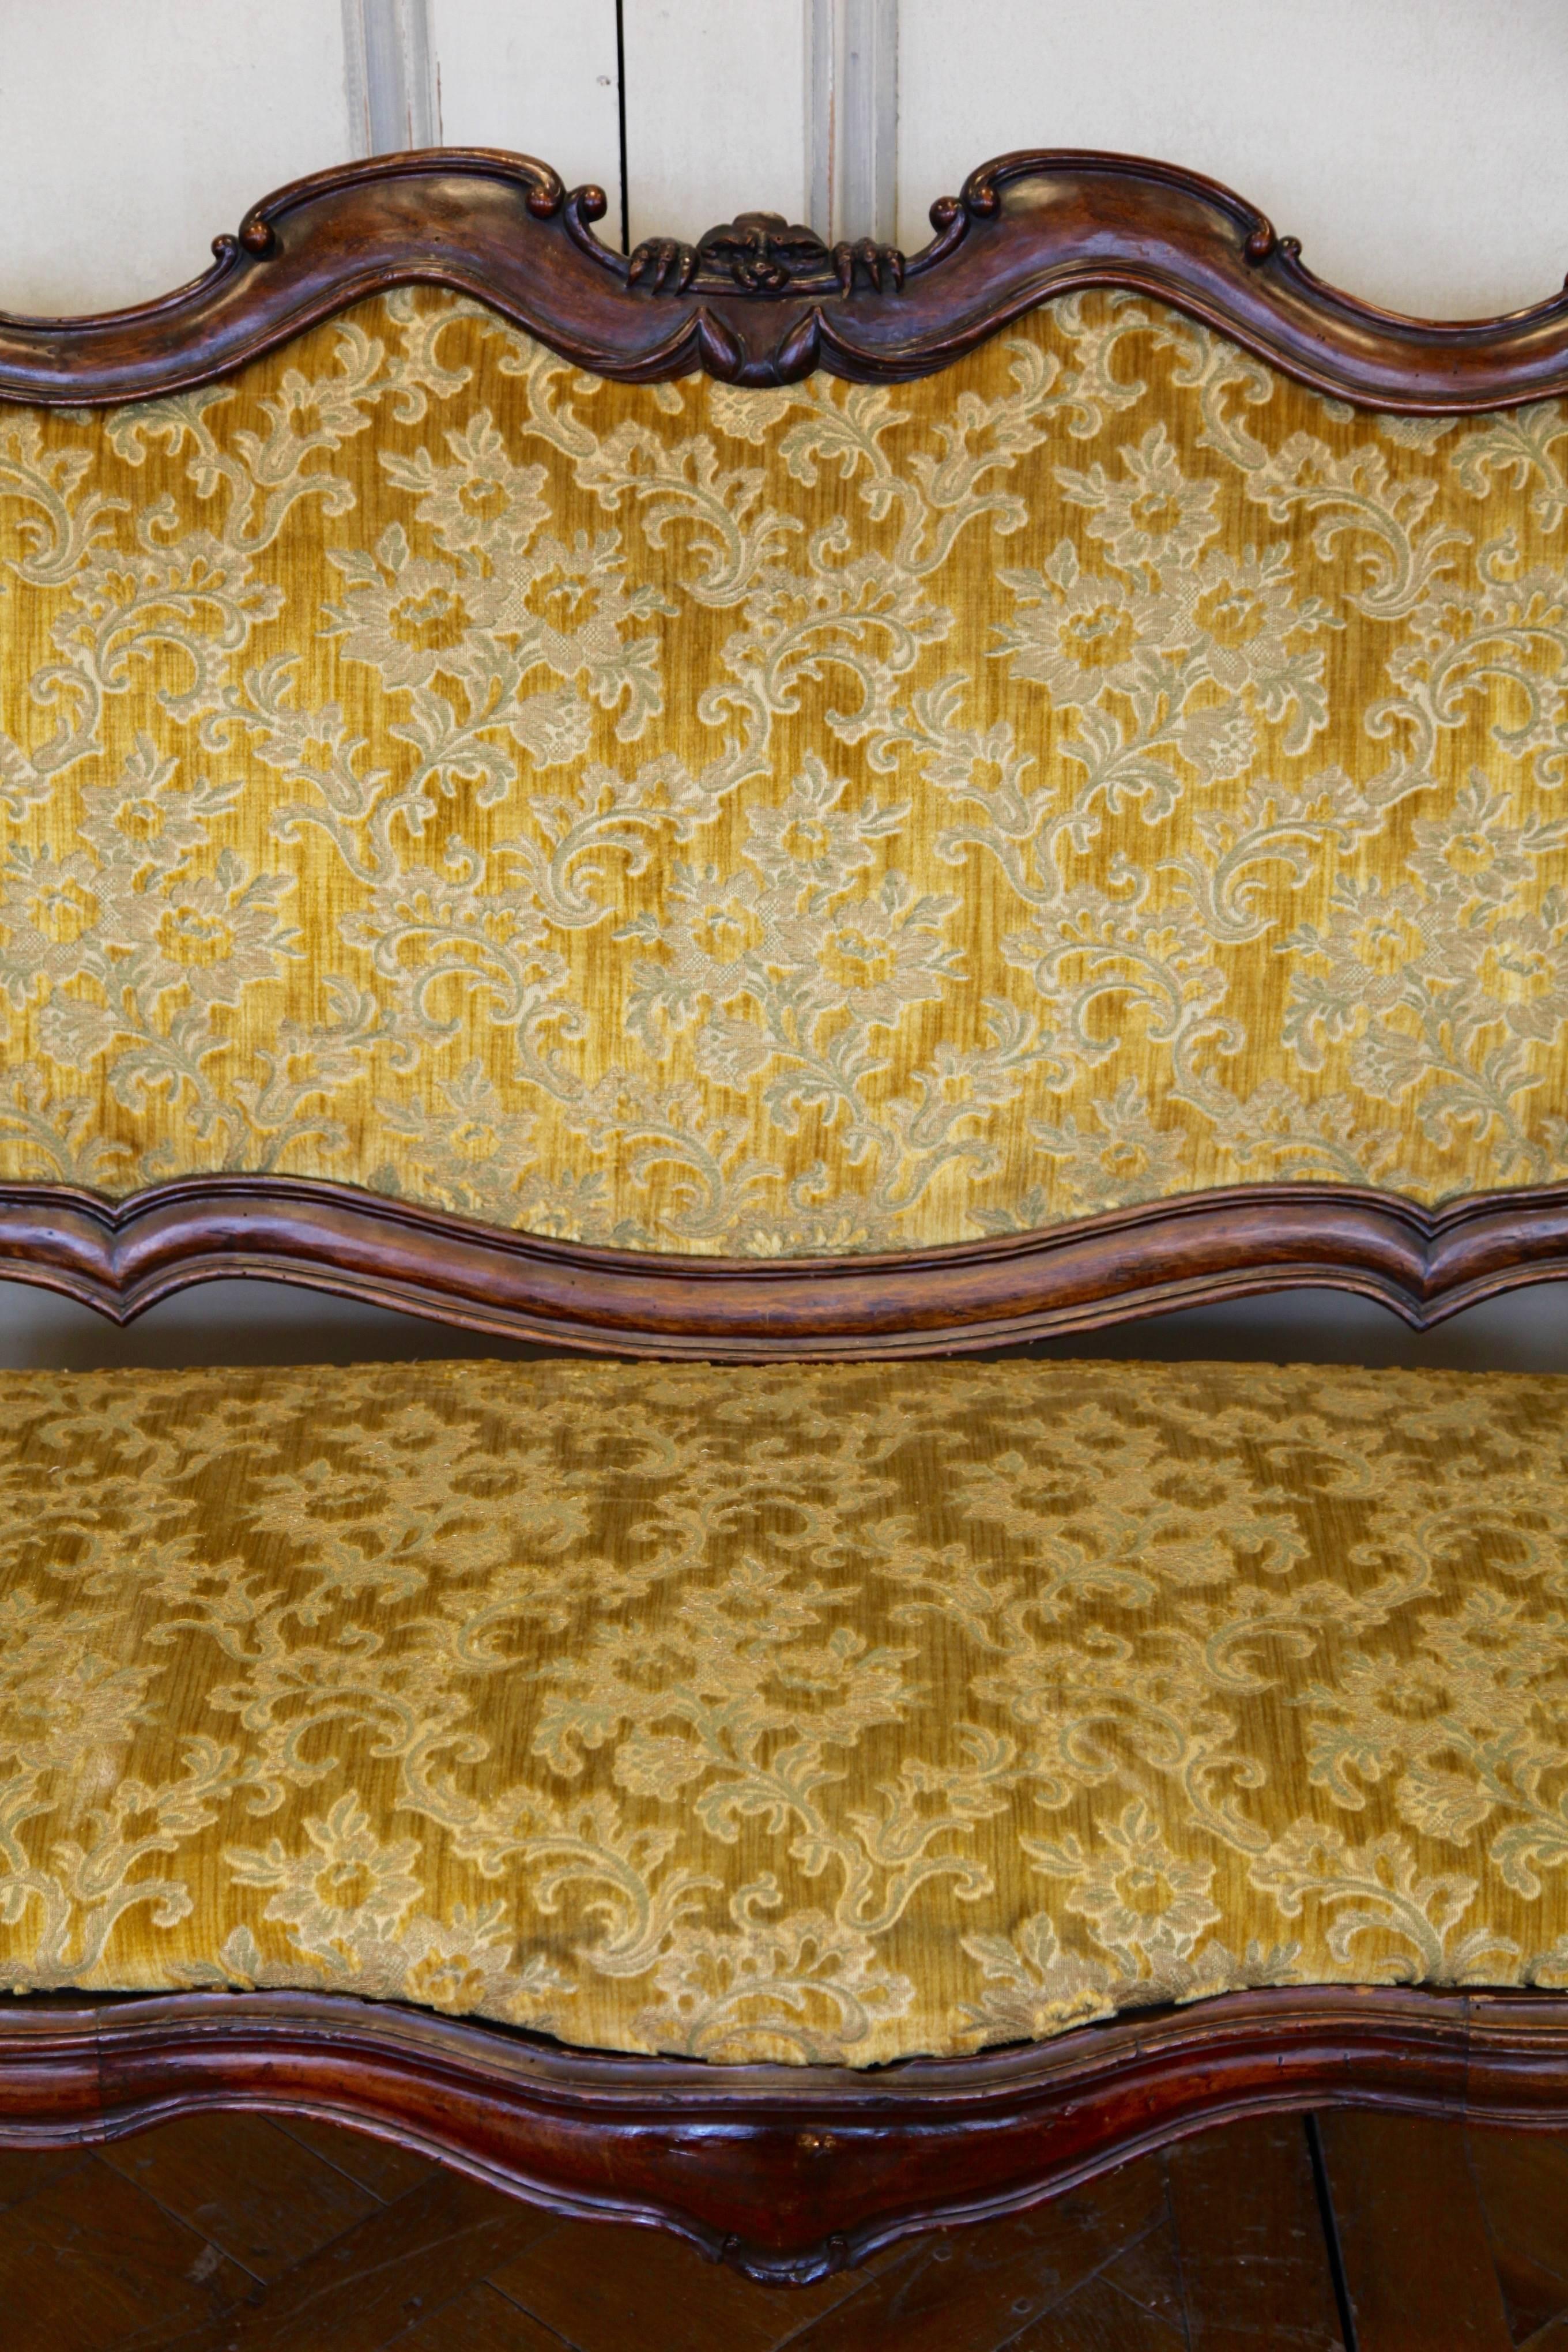 18th century couch